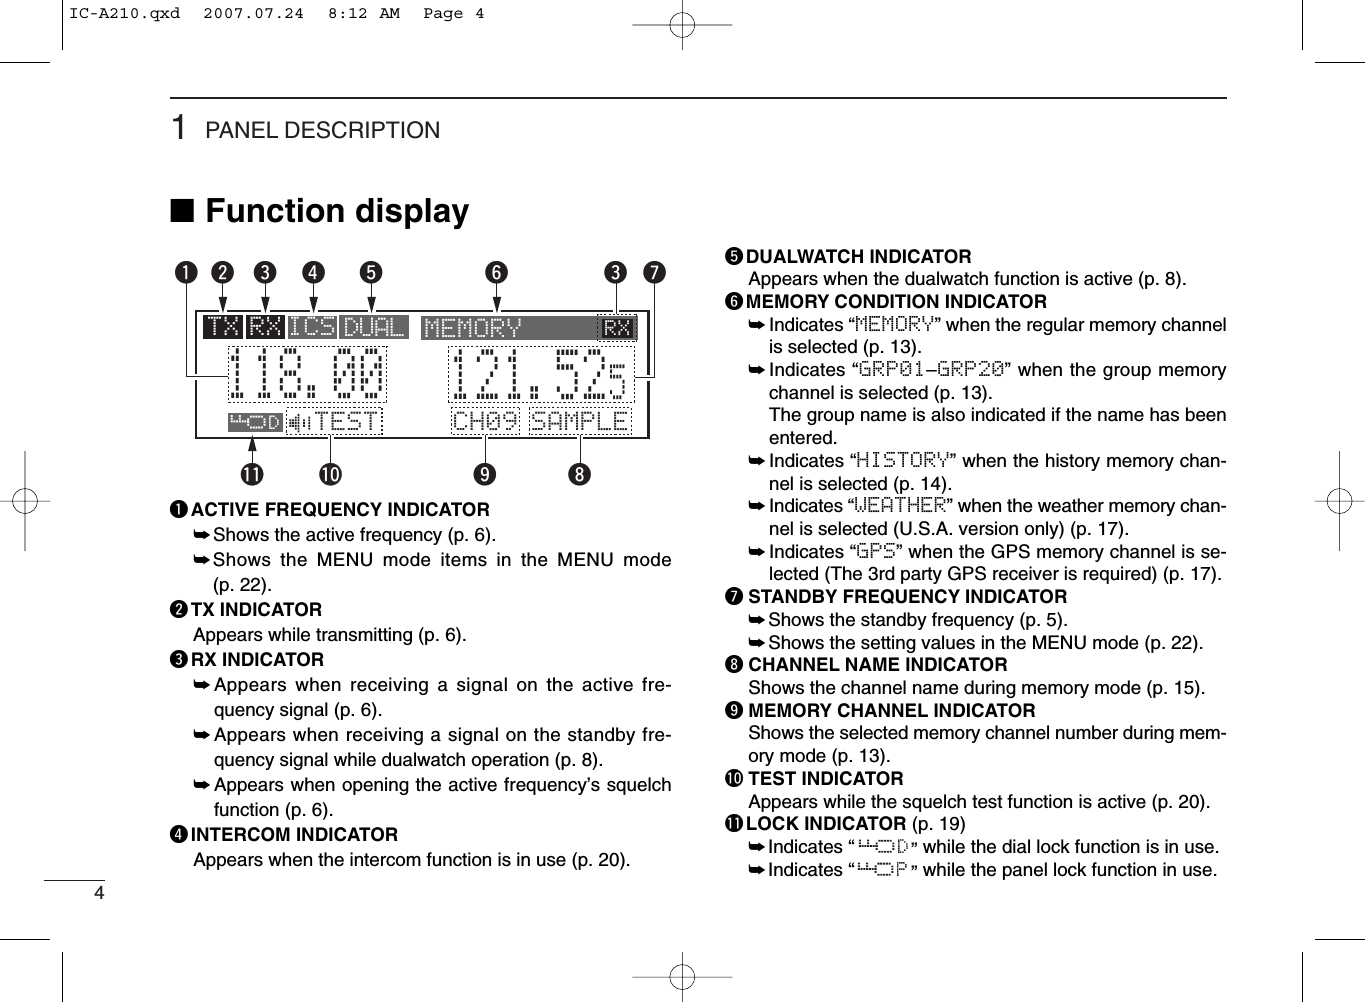 41PANEL DESCRIPTION■Function displayqACTIVE FREQUENCY INDICATOR➥Shows the active frequency (p. 6).➥Shows the MENU mode items in the MENU mode(p. 22).wTX INDICATORAppears while transmitting (p. 6).eRX INDICATOR➥Appears when receiving a signal on the active fre-quency signal (p. 6).➥Appears when receiving a signal on the standby fre-quency signal while dualwatch operation (p. 8).➥Appears when opening the active frequency’s squelchfunction (p. 6).rINTERCOM INDICATORAppears when the intercom function is in use (p. 20).tDUALWATCH INDICATORAppears when the dualwatch function is active (p. 8).yMEMORY CONDITION INDICATOR➥Indicates “MEMORY” when the regular memory channelis selected (p. 13).➥Indicates “GRP01–GRP20” when the group memorychannel is selected (p. 13).The group name is also indicated if the name has beenentered.➥Indicates “HISTORY” when the history memory chan-nel is selected (p. 14).➥Indicates “WEATHER” when the weather memory chan-nel is selected (U.S.A. version only) (p. 17).➥Indicates “GPS” when the GPS memory channel is se-lected (The 3rd party GPS receiver is required) (p. 17).uSTANDBY FREQUENCY INDICATOR➥Shows the standby frequency (p. 5).➥Shows the setting values in the MENU mode (p. 22).iCHANNEL NAME INDICATORShows the channel name during memory mode (p. 15).oMEMORY CHANNEL INDICATORShows the selected memory channel number during mem-ory mode (p. 13).!0 TEST INDICATORAppears while the squelch test function is active (p. 20).!1 LOCK INDICATOR (p. 19)➥Indicates “ ”while the dial lock function is in use.➥Indicates “ ”while the panel lock function in use.CH09 SAMPLETEST121.525118.00RX DUAL MEMORY RXICSOFDTXetr y eio!1uq!0wIC-A210.qxd  2007.07.24  8:12 AM  Page 4